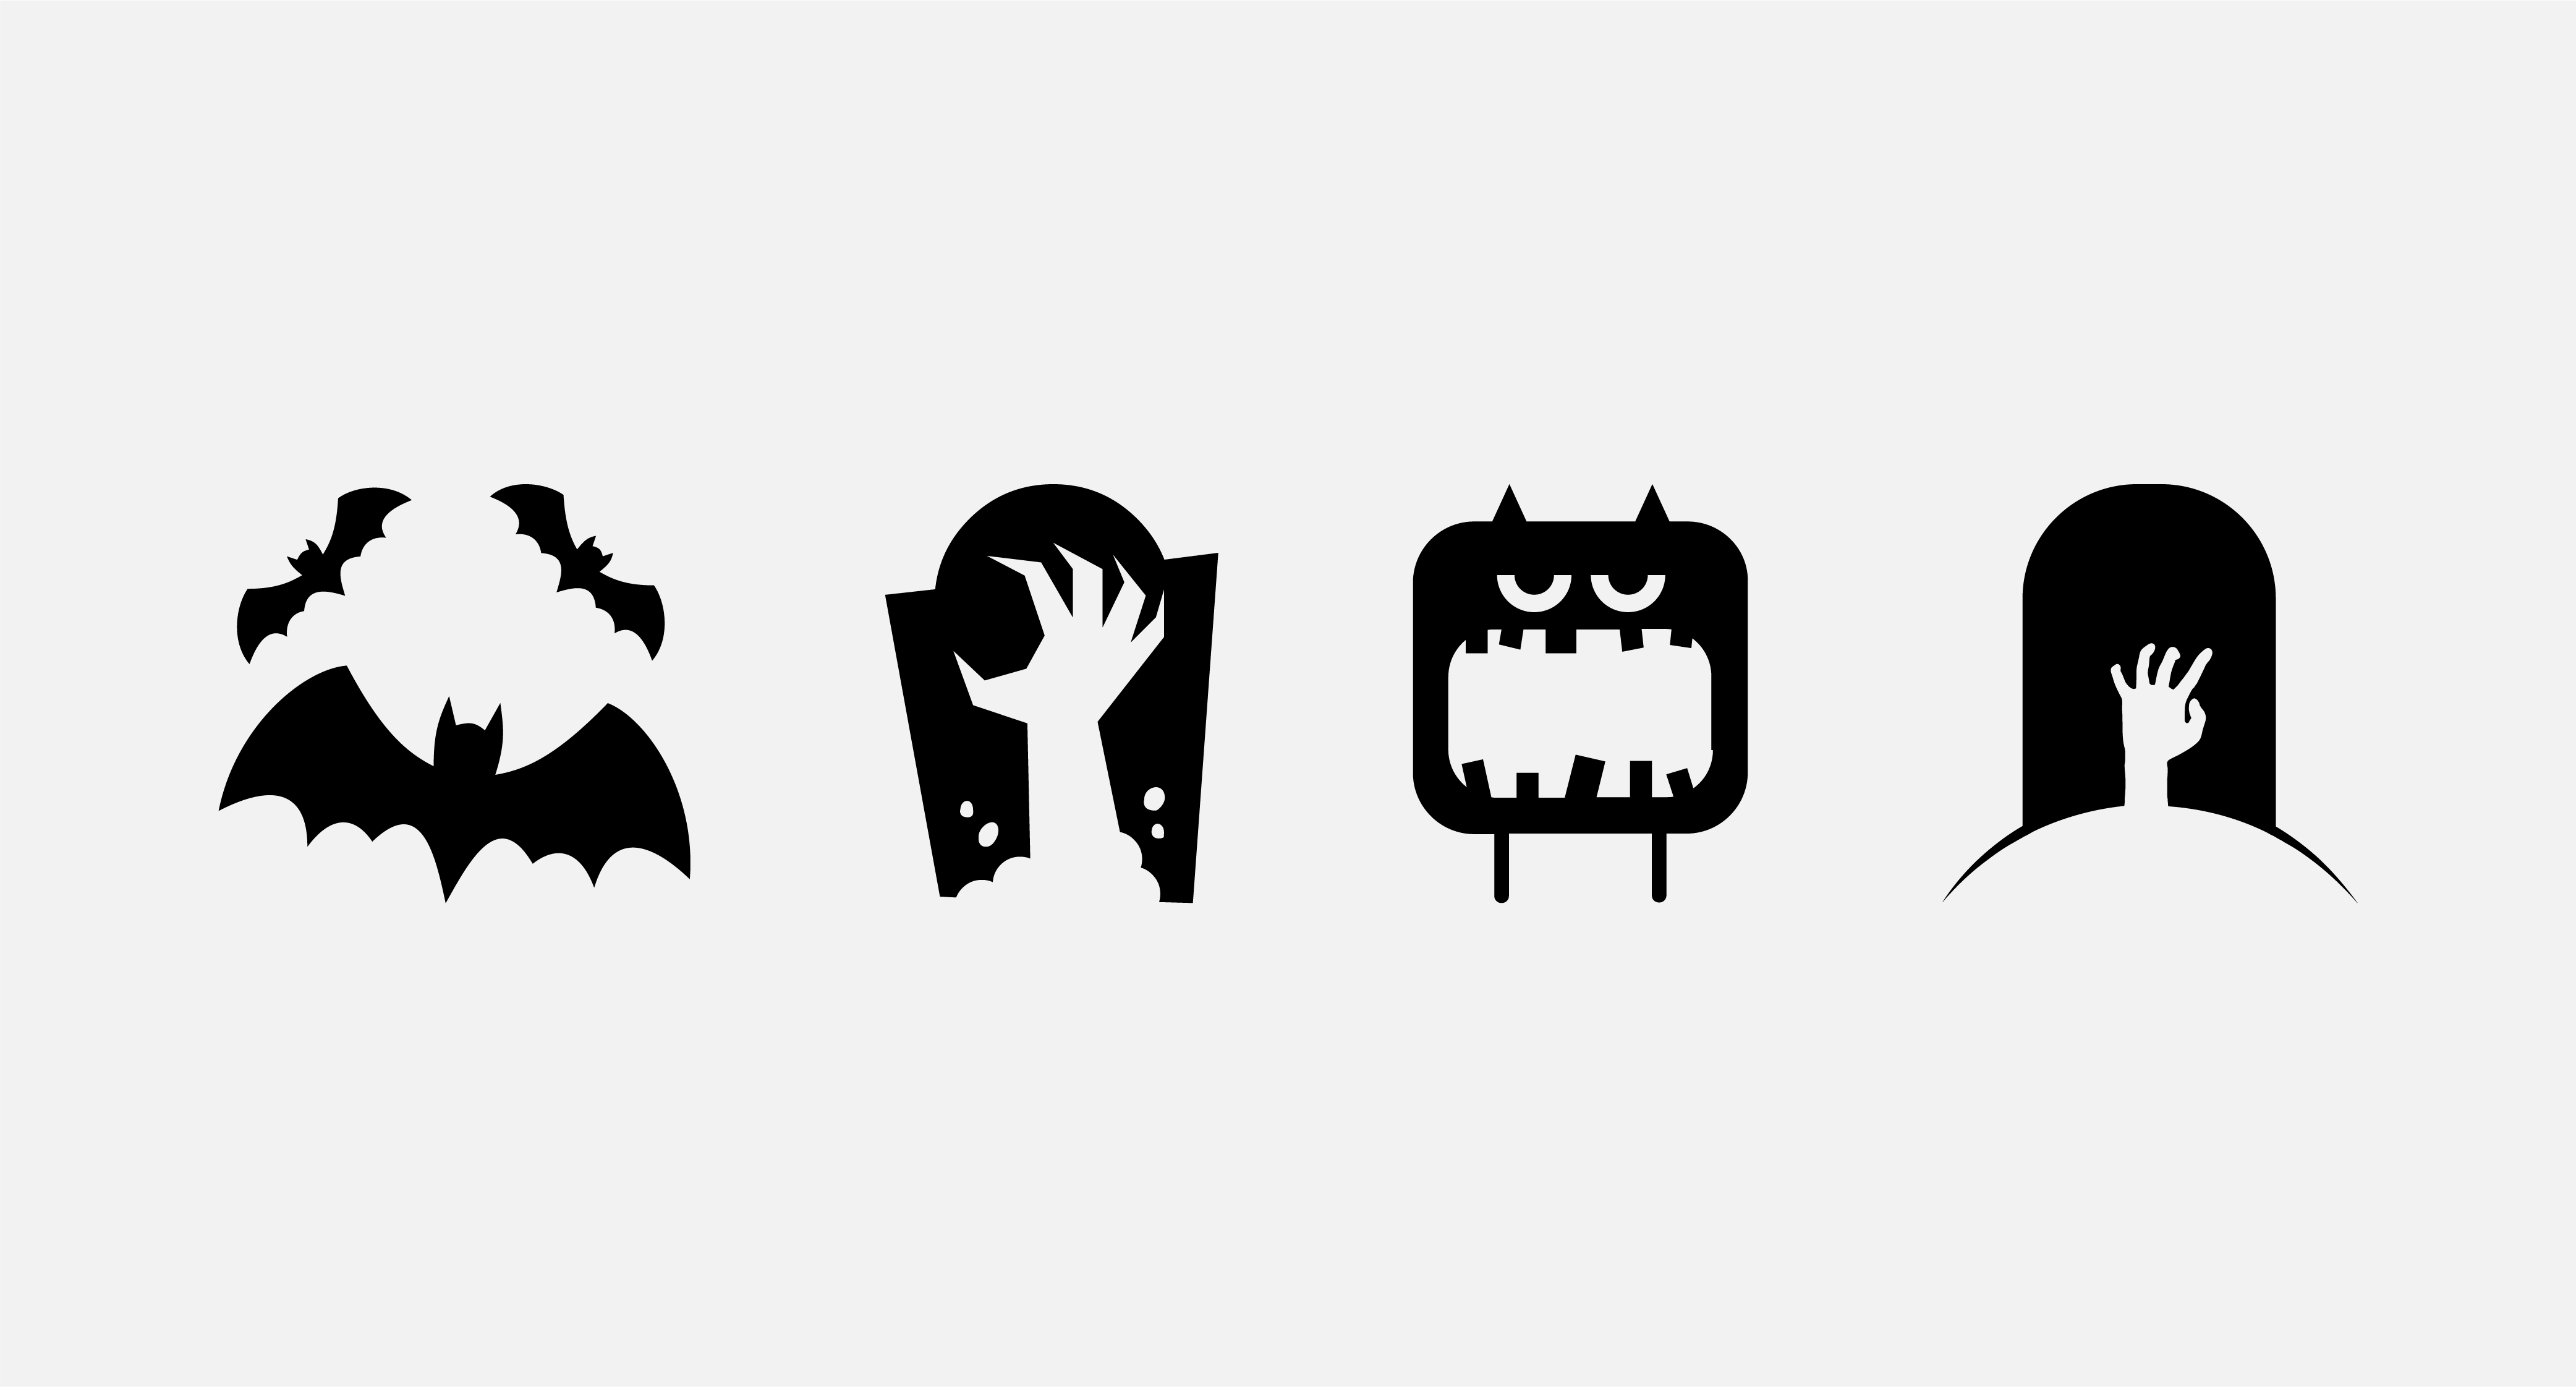 Create Your Own Stencil for Pumpkin Carving With These 5 Easy Steps | by  Lindsay Stuart | Noun Project | Medium